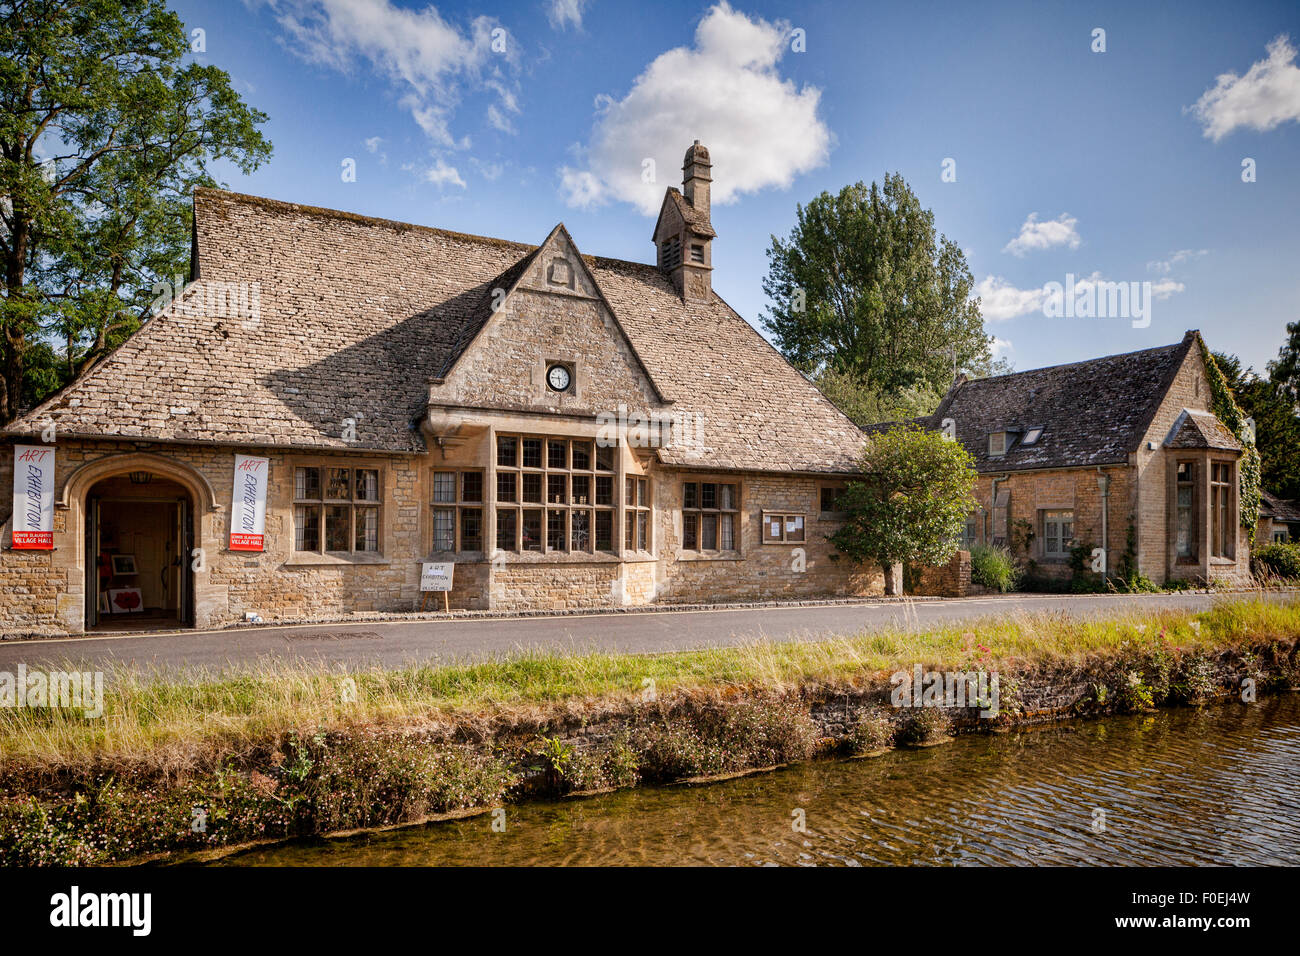 Village Hall in Lower Slaughter, nel Gloucestershire. Foto Stock